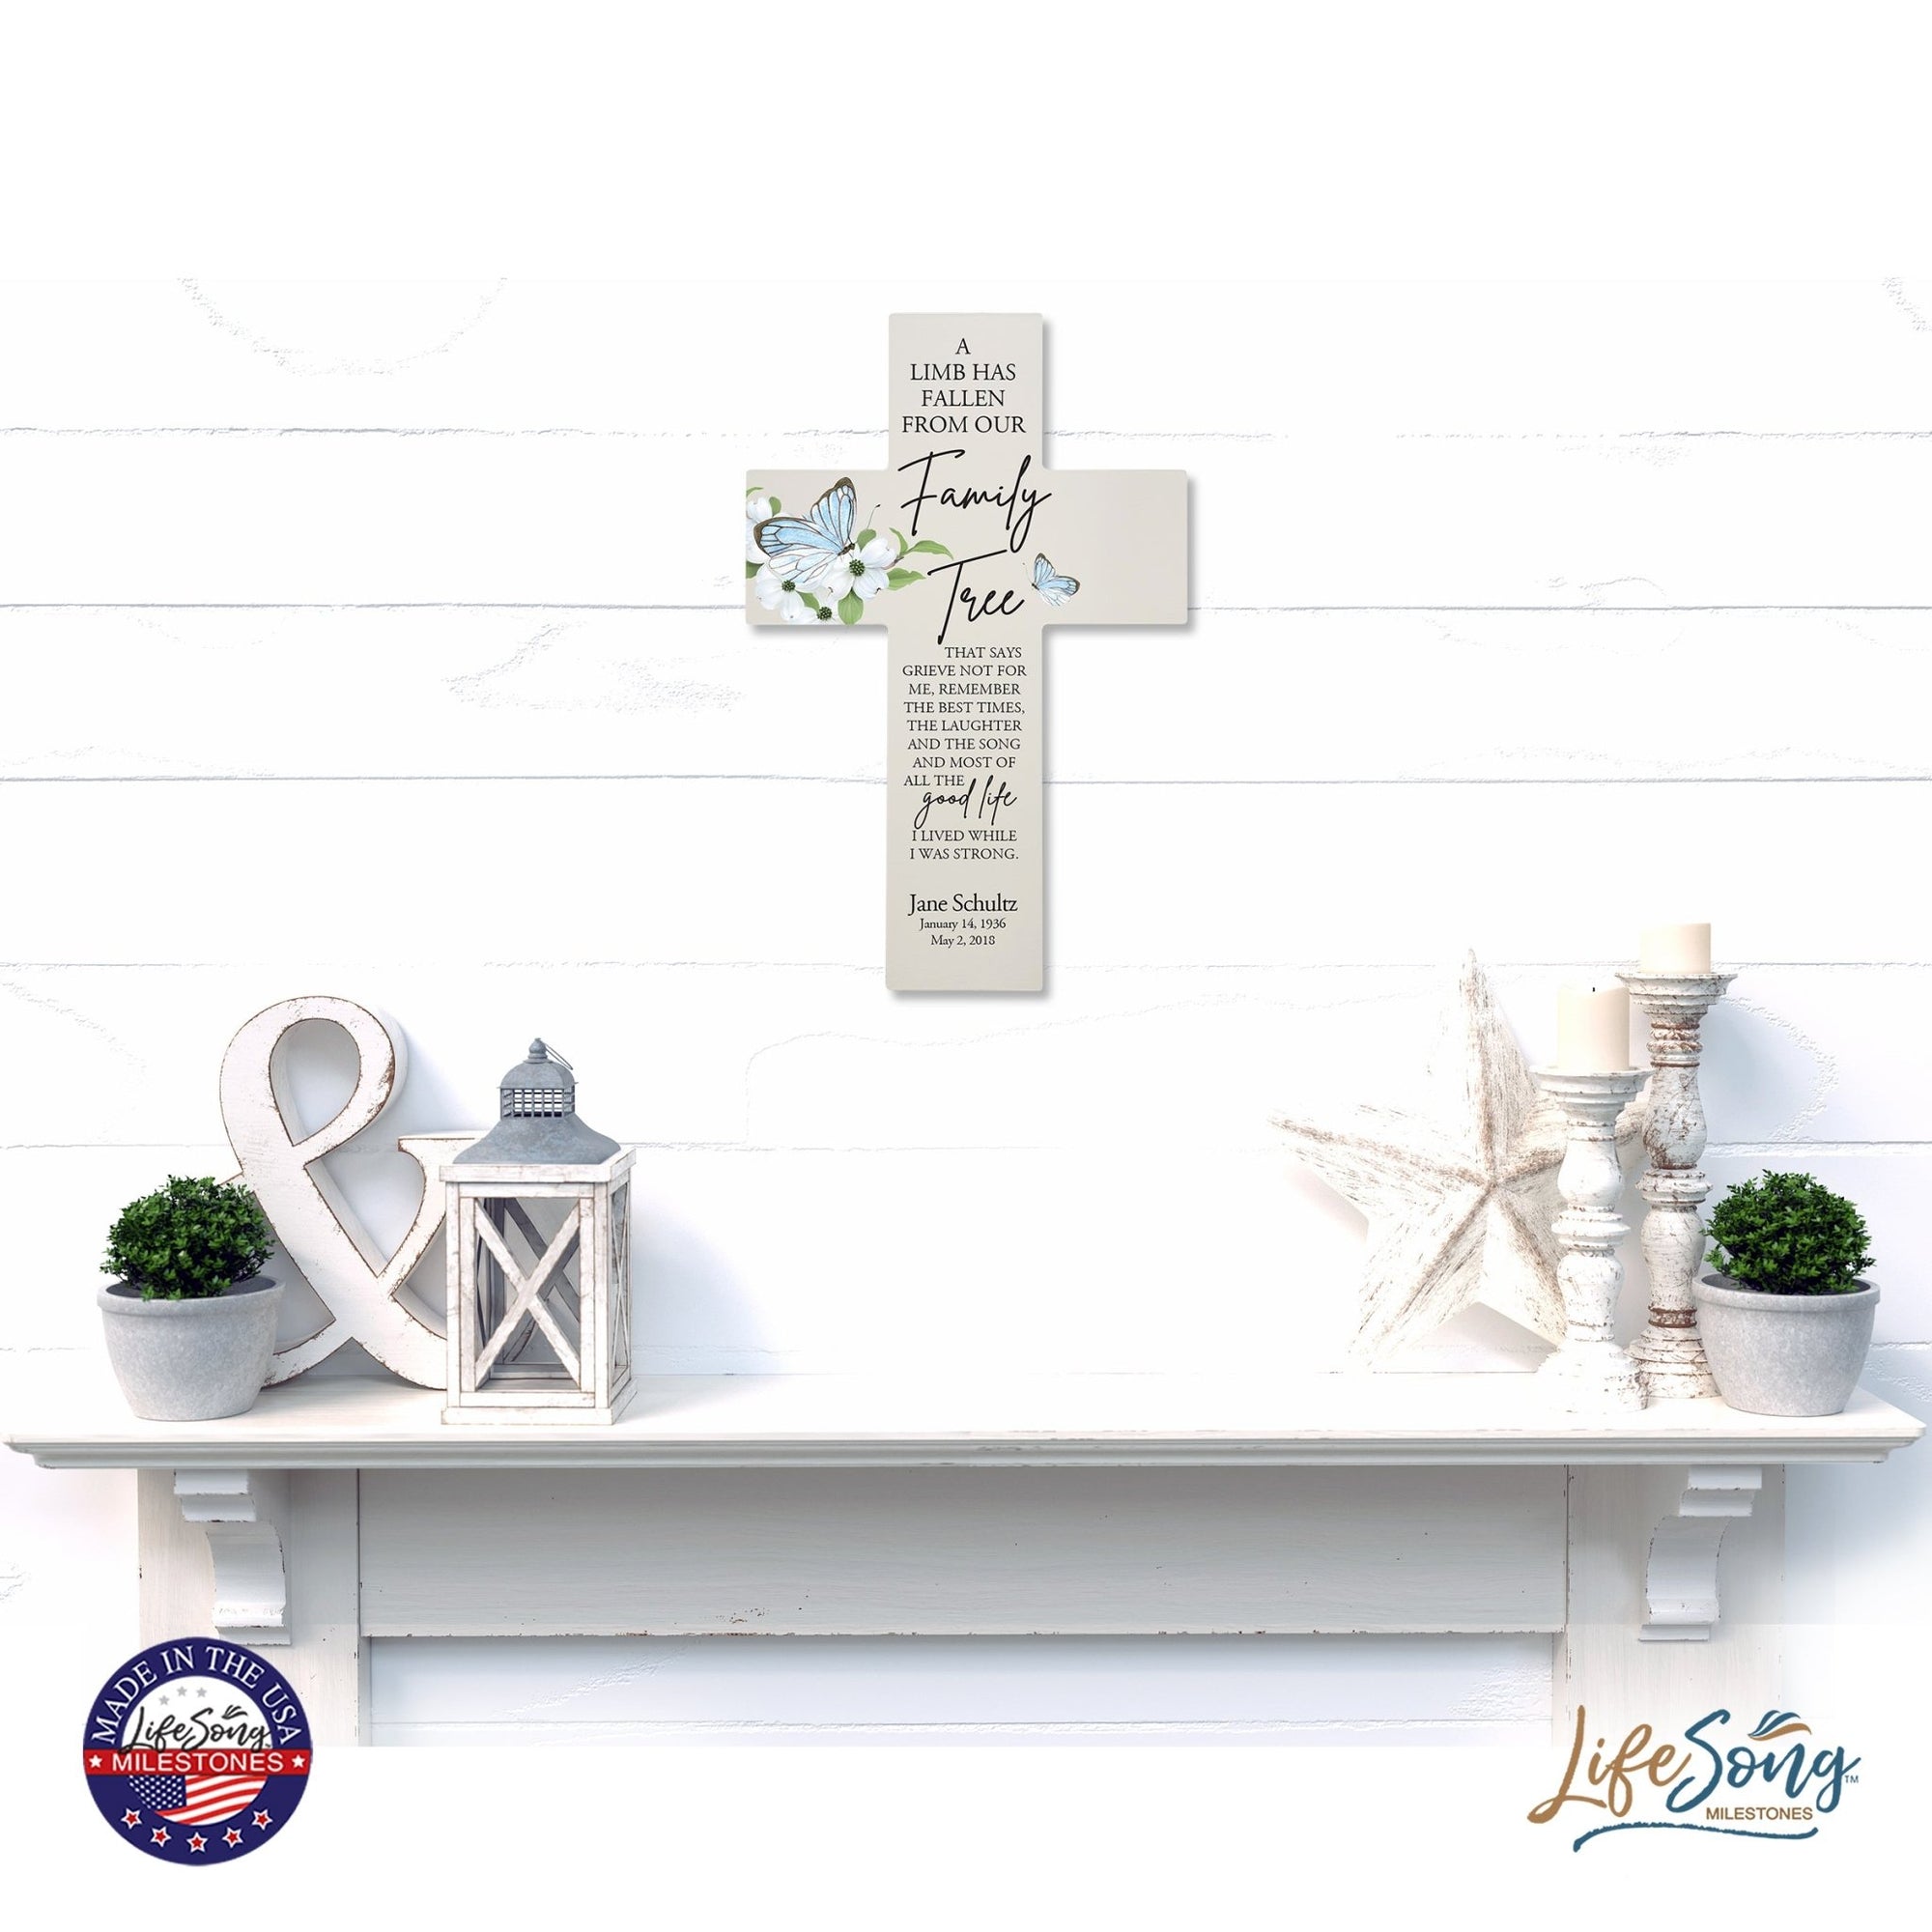 Personalized Butterfly Memorial Bereavement Wall Cross For Loss of Loved One A Limb Has Fallen (Butterfly) Quote 14 x 9.25 A Limb Has Fallen From Our Family Tree That Says Grieve Not For Me - LifeSong Milestones